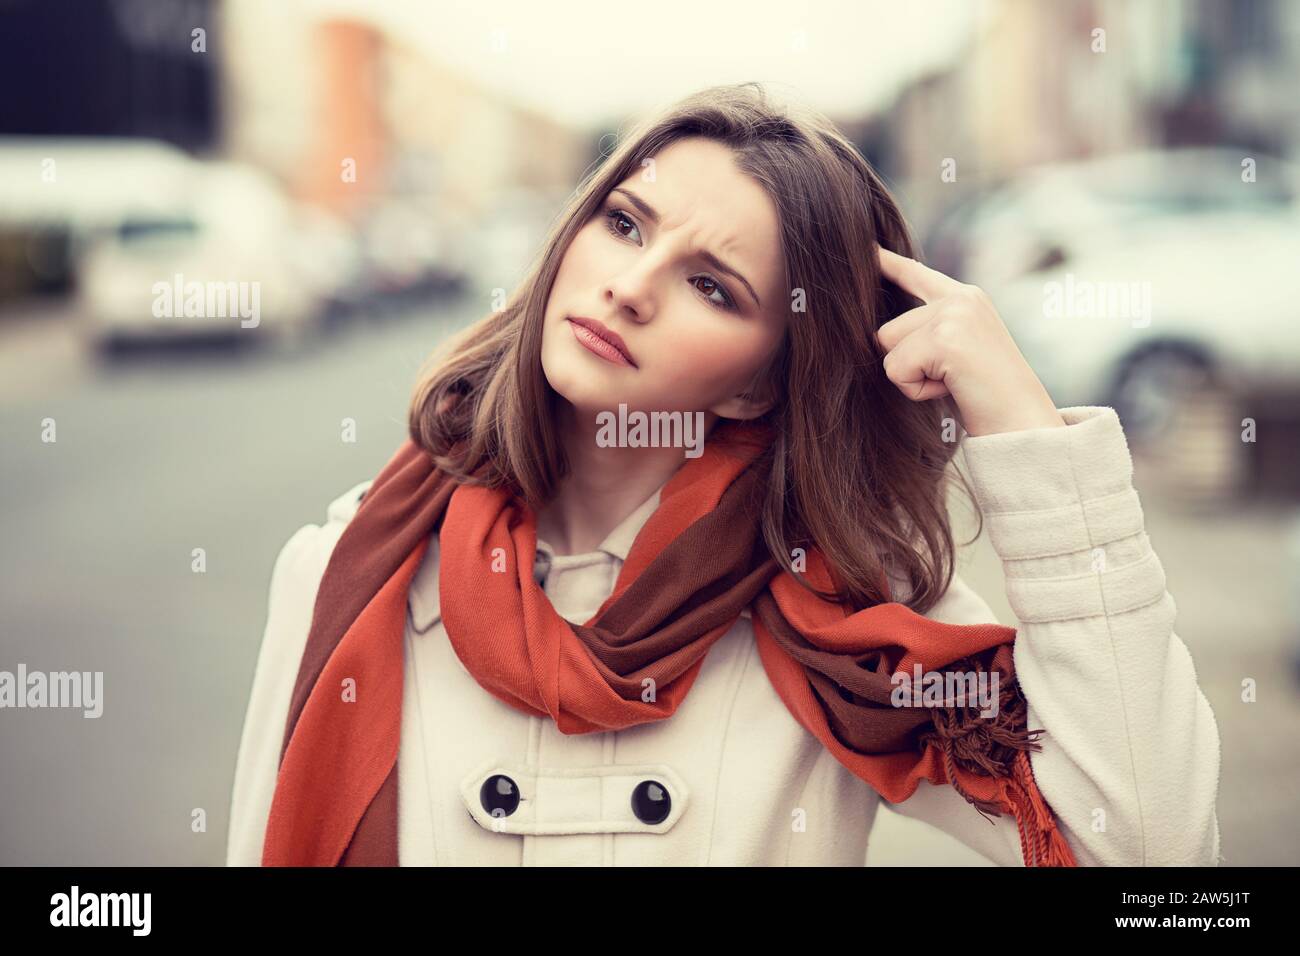 Thinking Emotional Beautiful Woman in Profile Looking Down with Stock Image  - Image of adult, female: 120138289